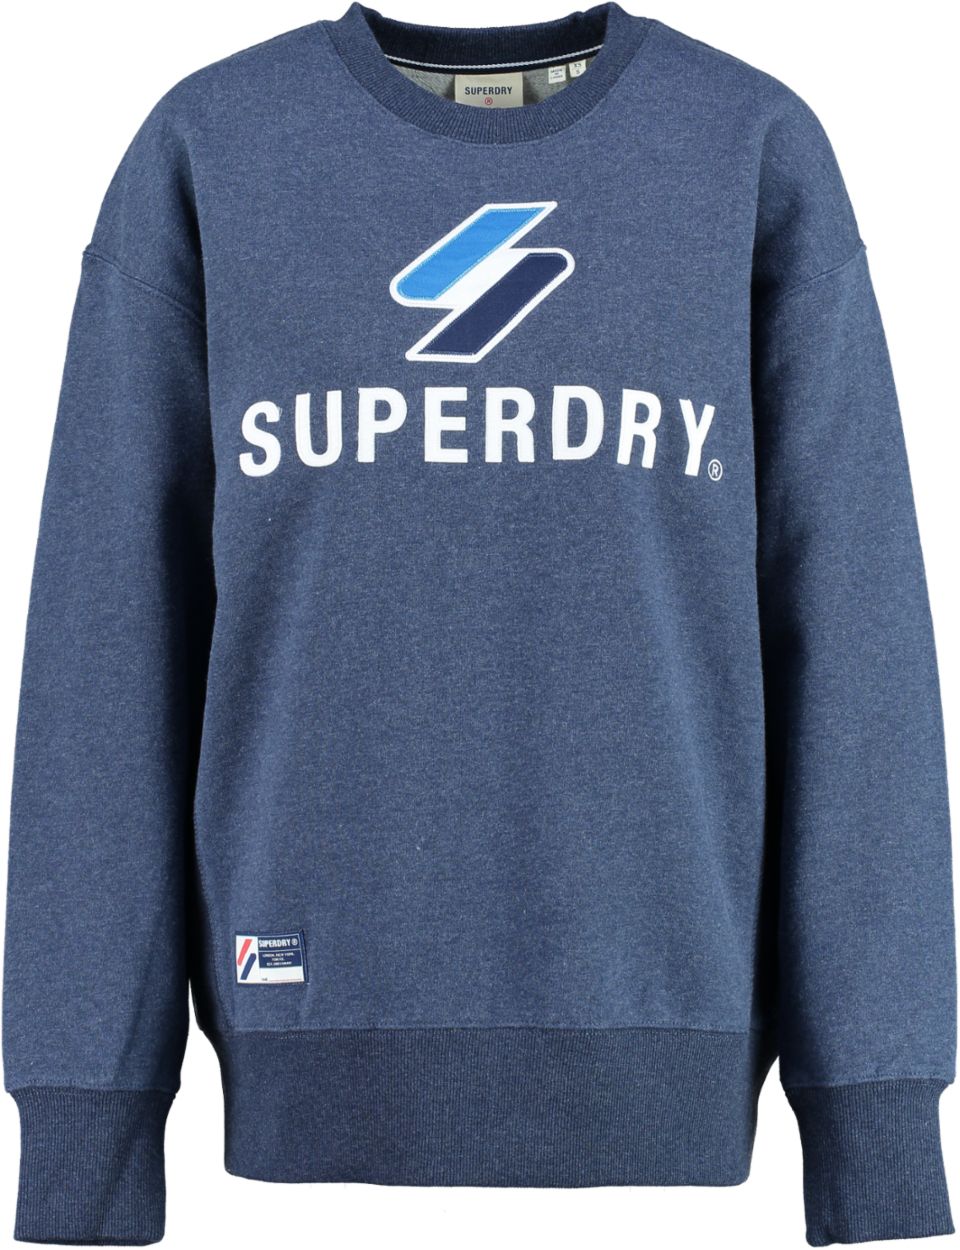 Superdry Sweater SUPERDRY CODE